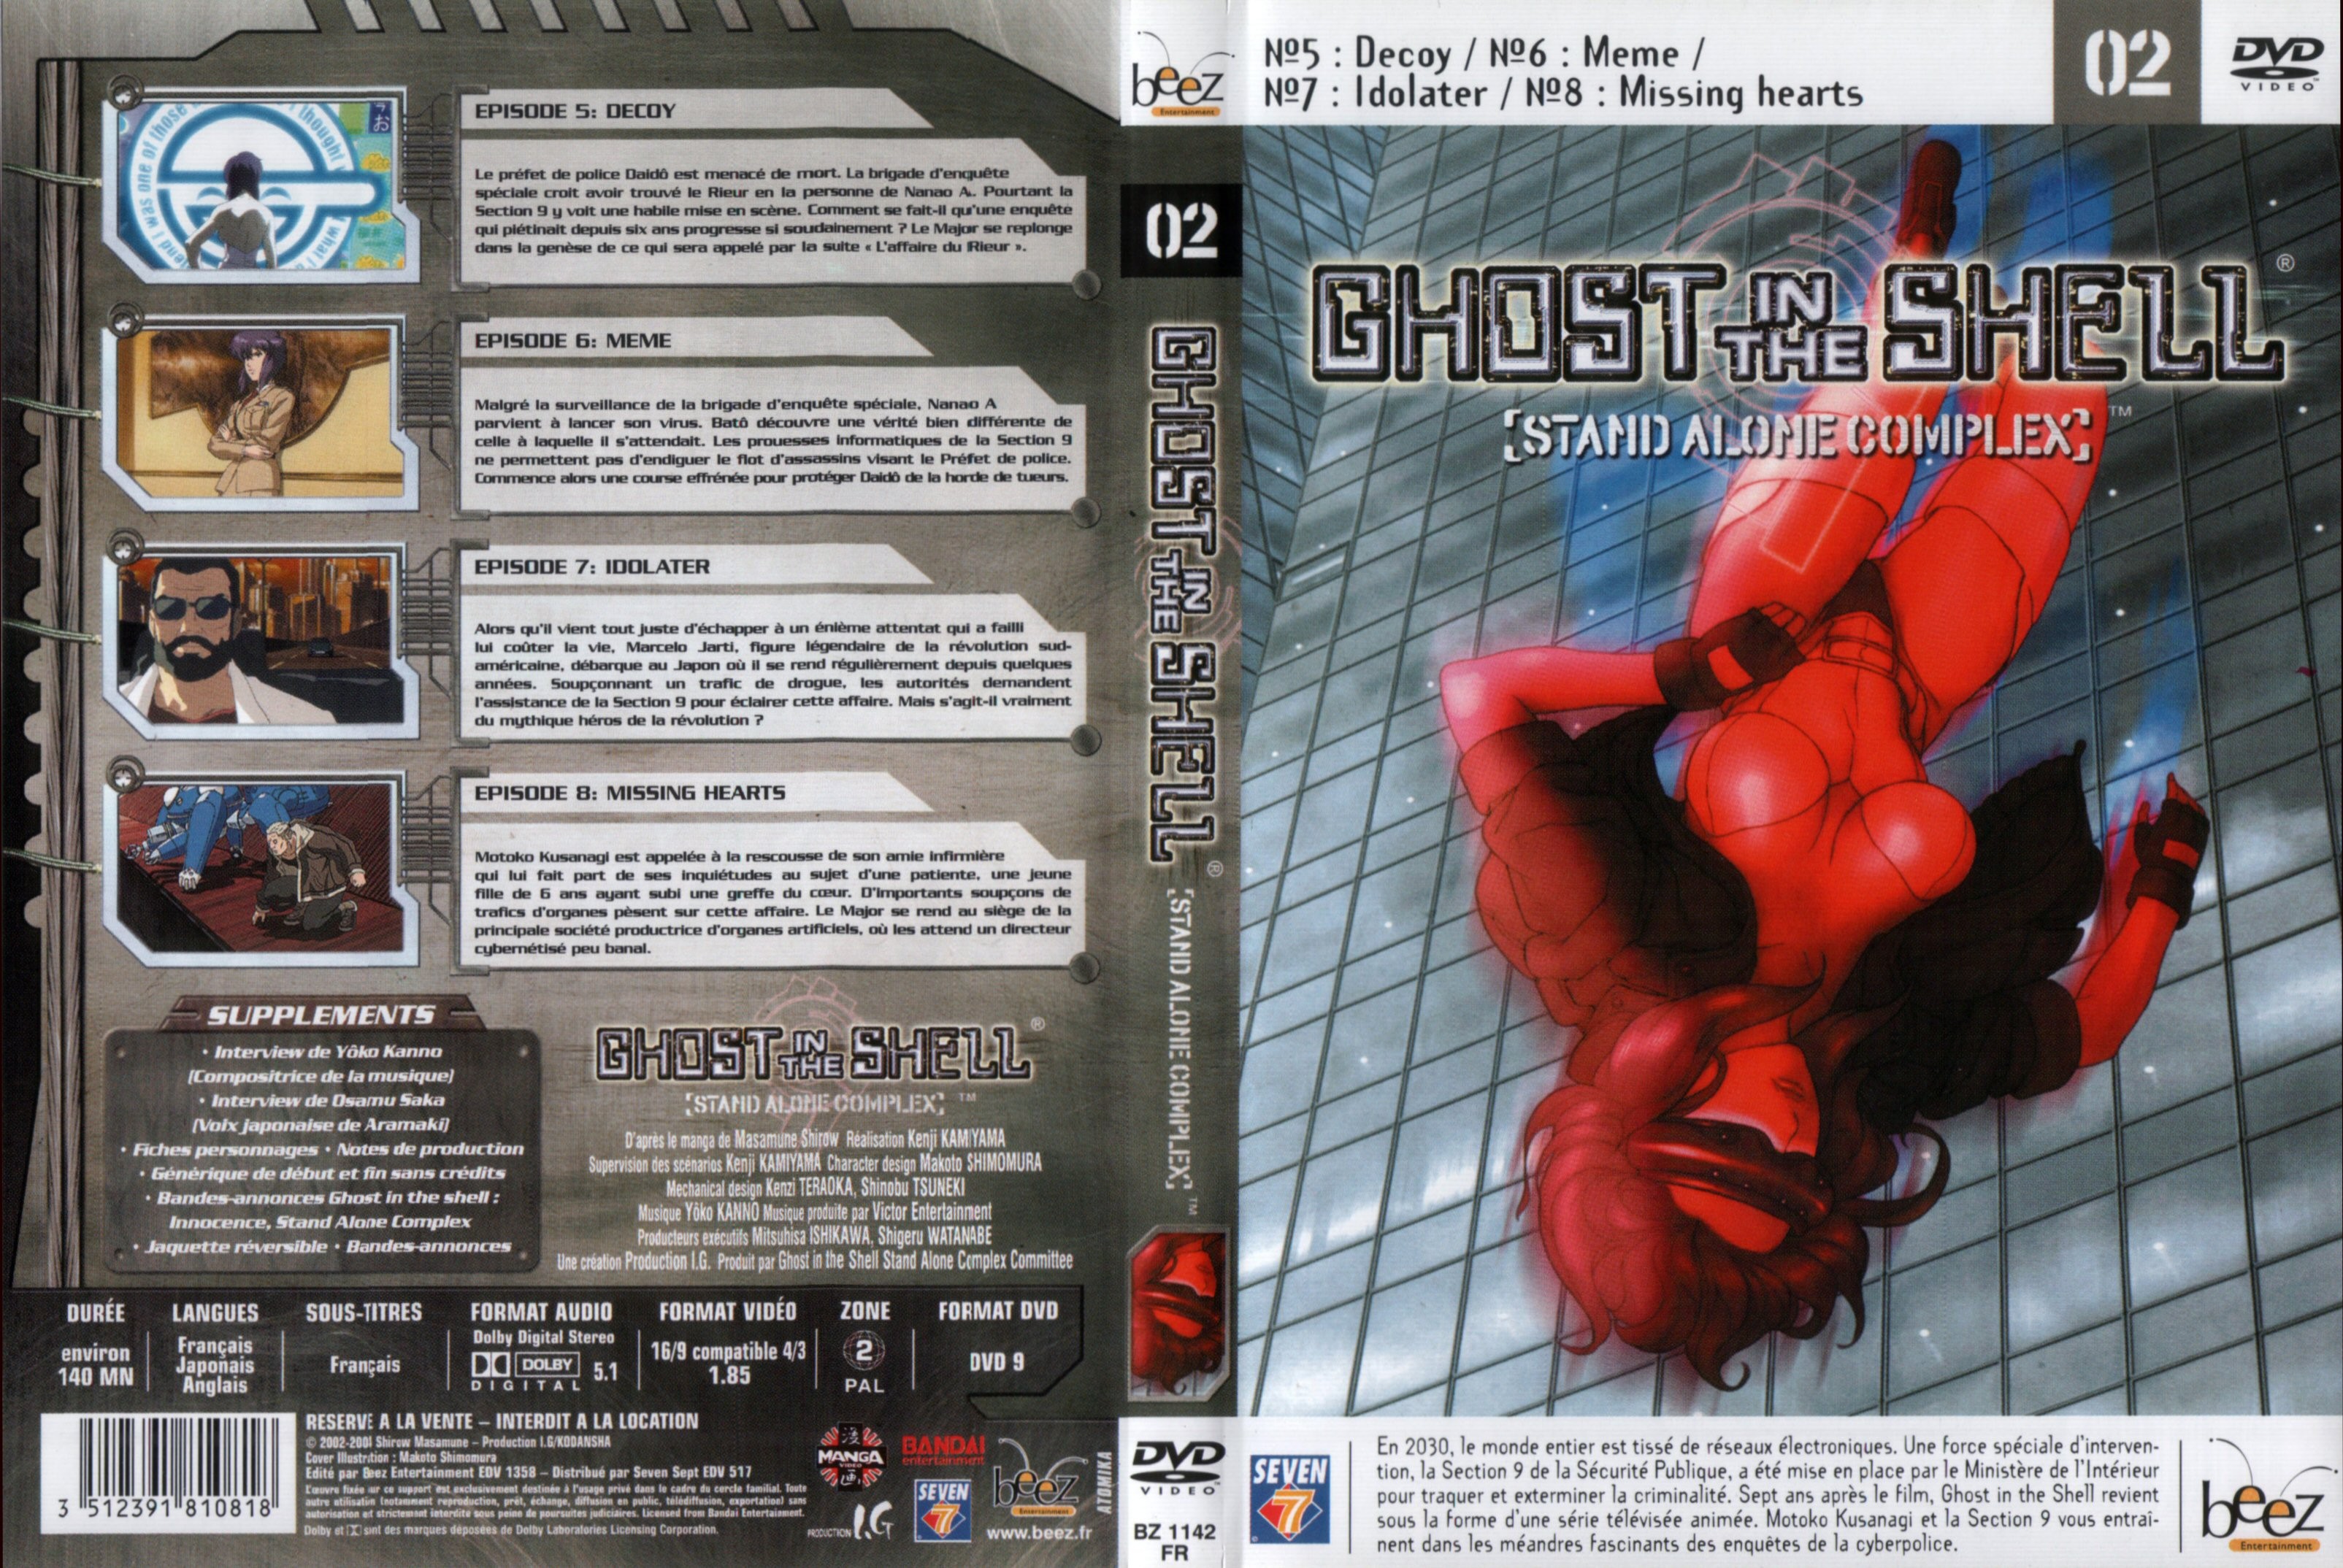 Jaquette DVD Ghost in the shell - stand alone complex vol 2